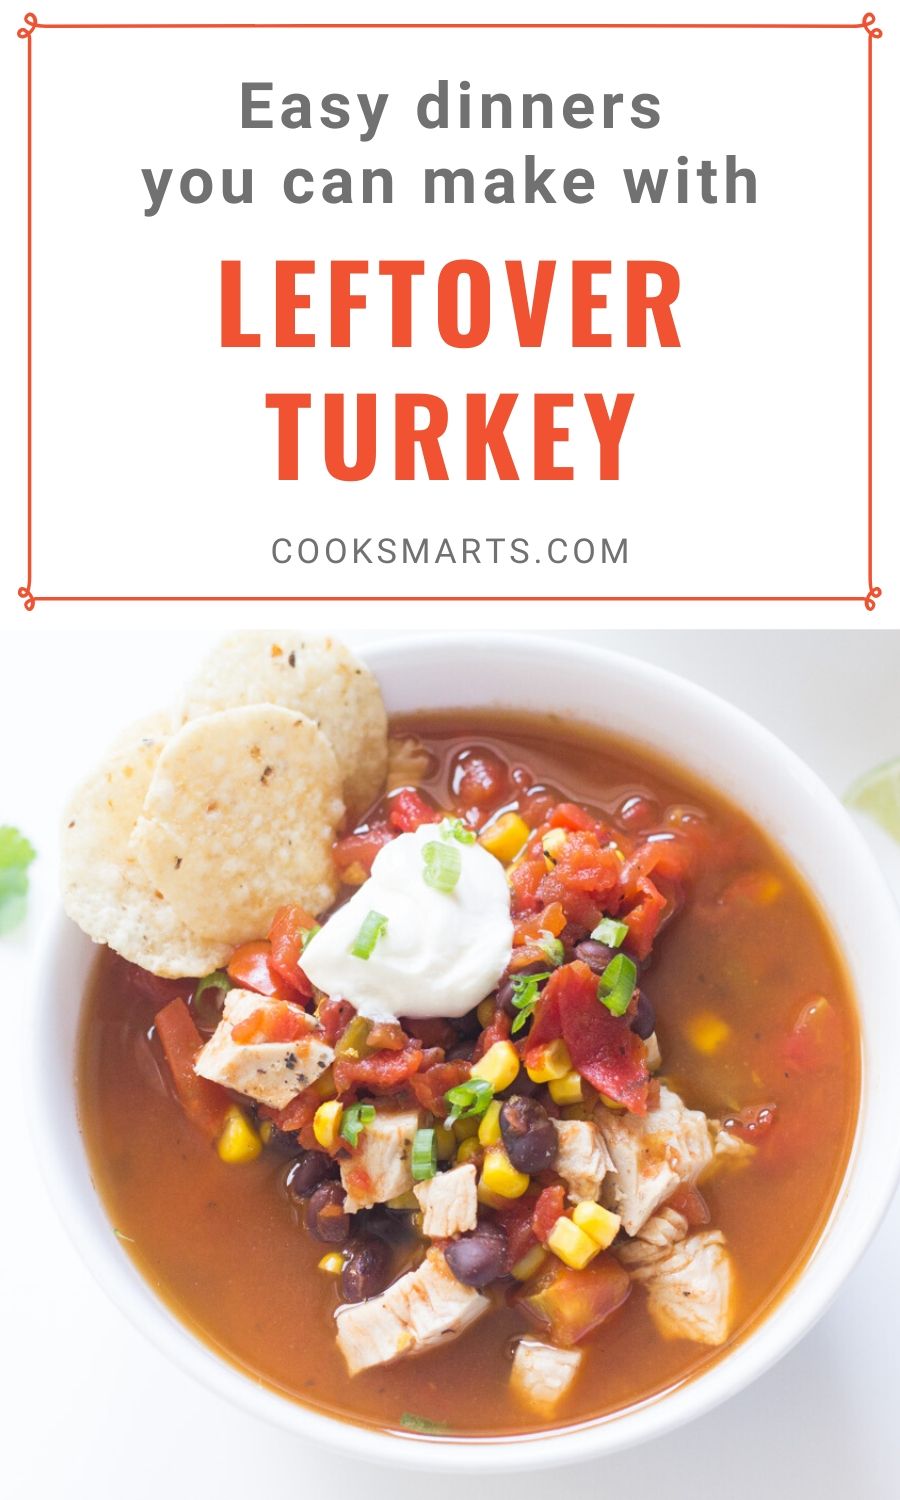 5 Creative Dinners from Leftover Turkey | Cook Smarts